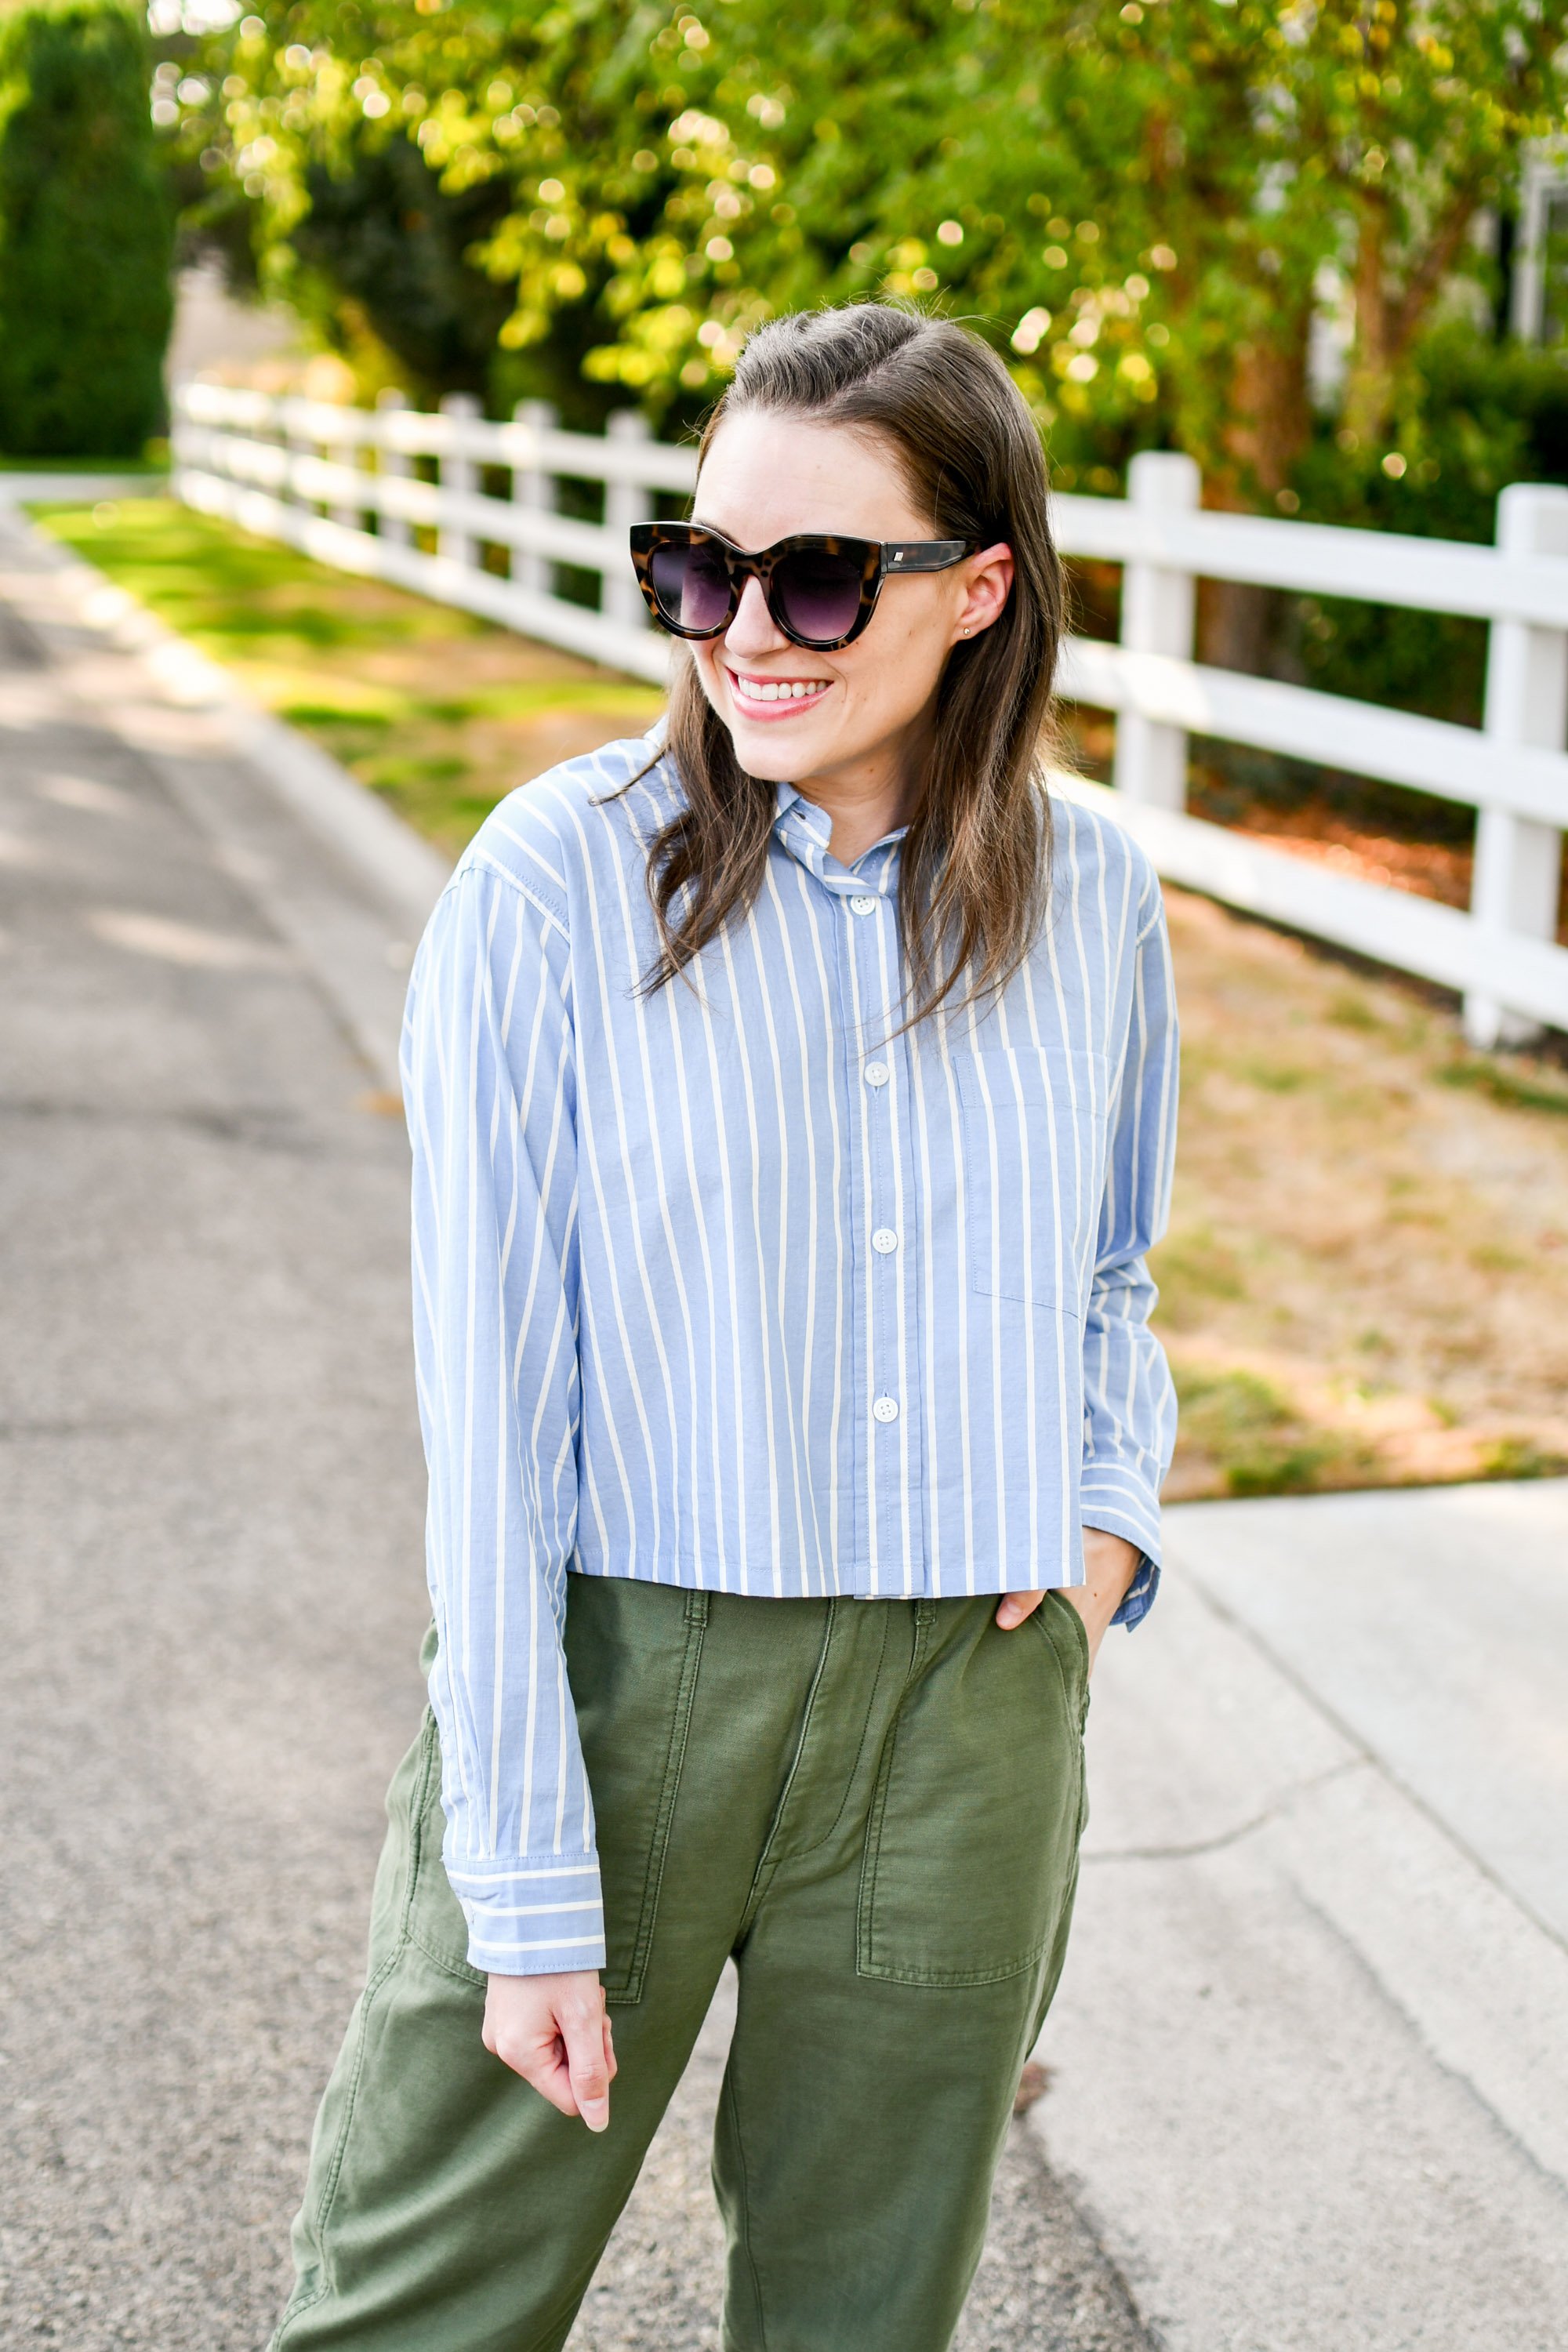 How To Style Cargo Pants If You'Re Petite